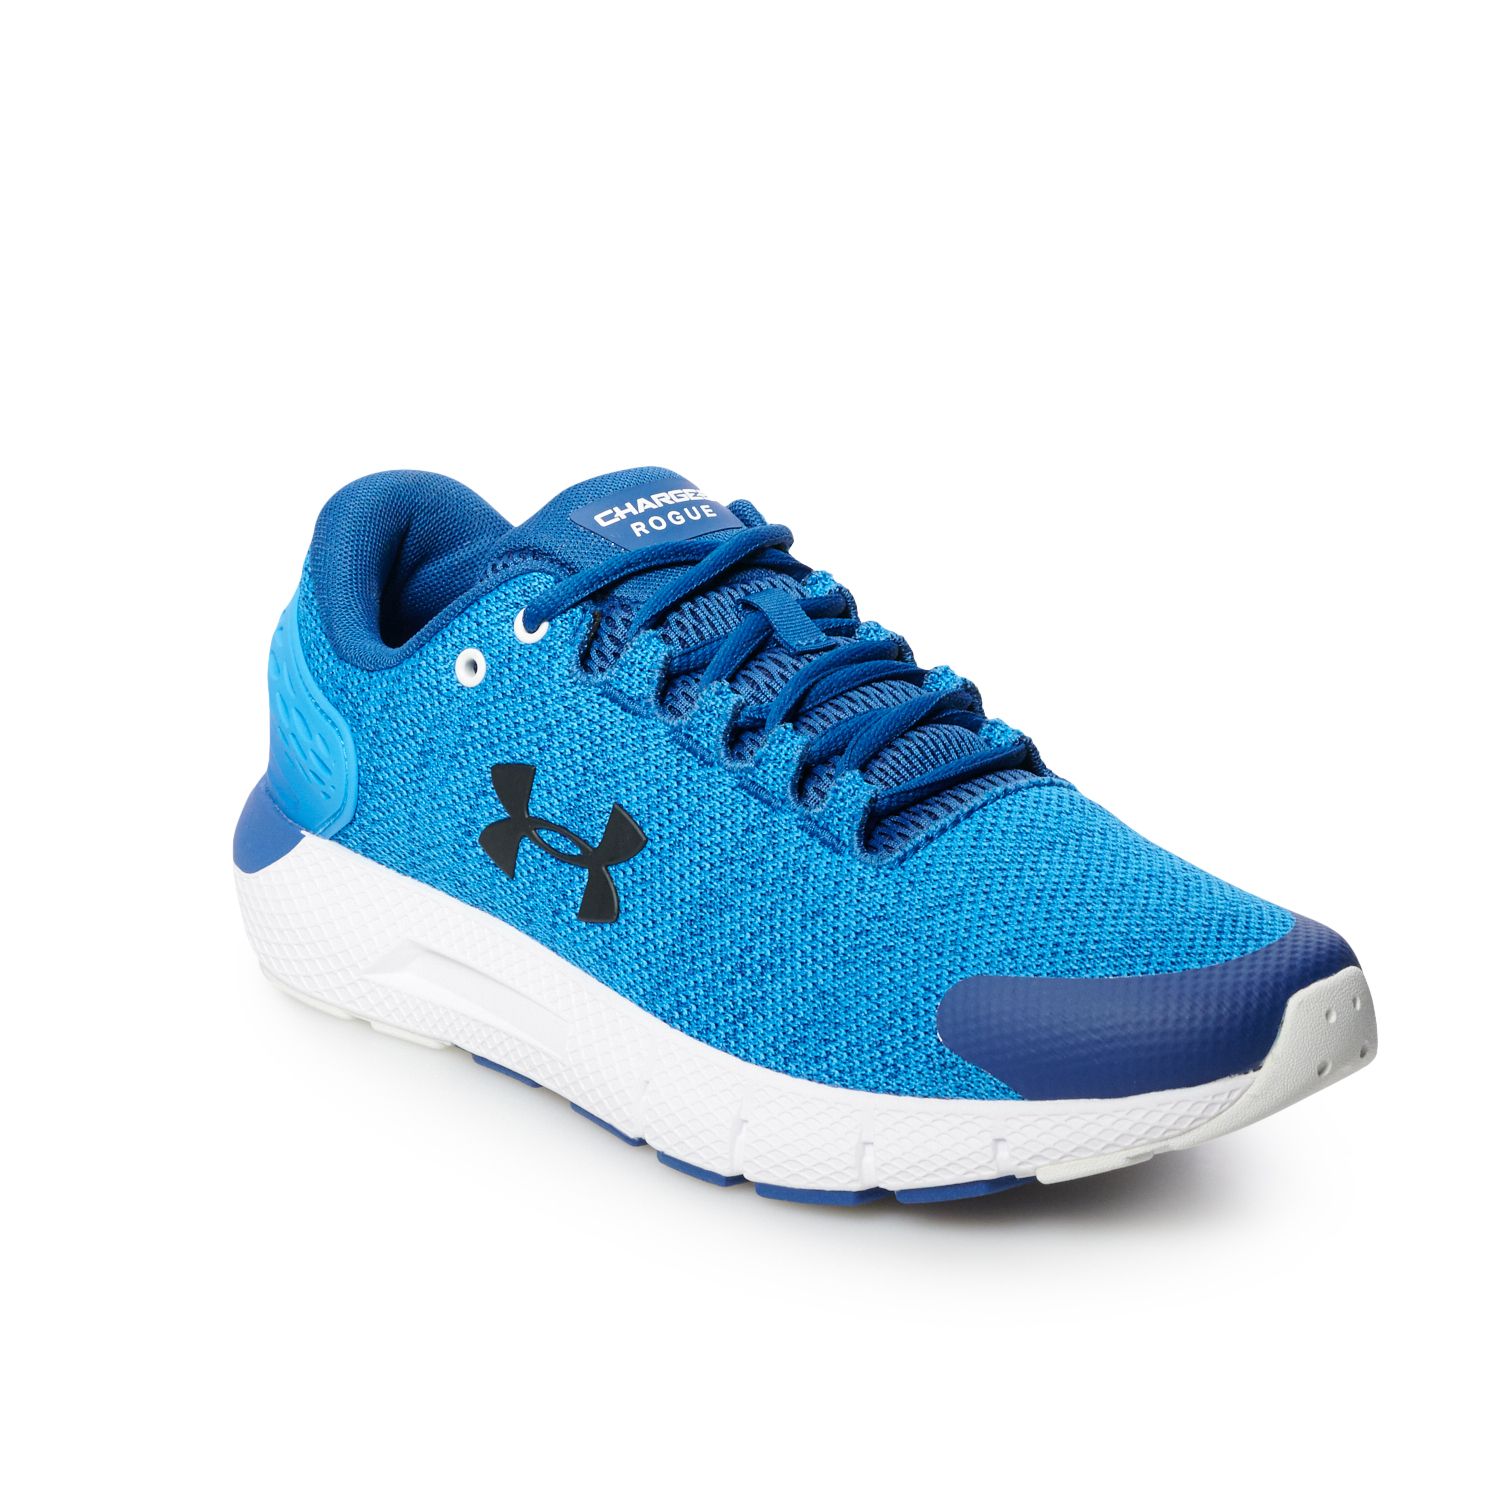 under armour men's charged rogue twist running shoe